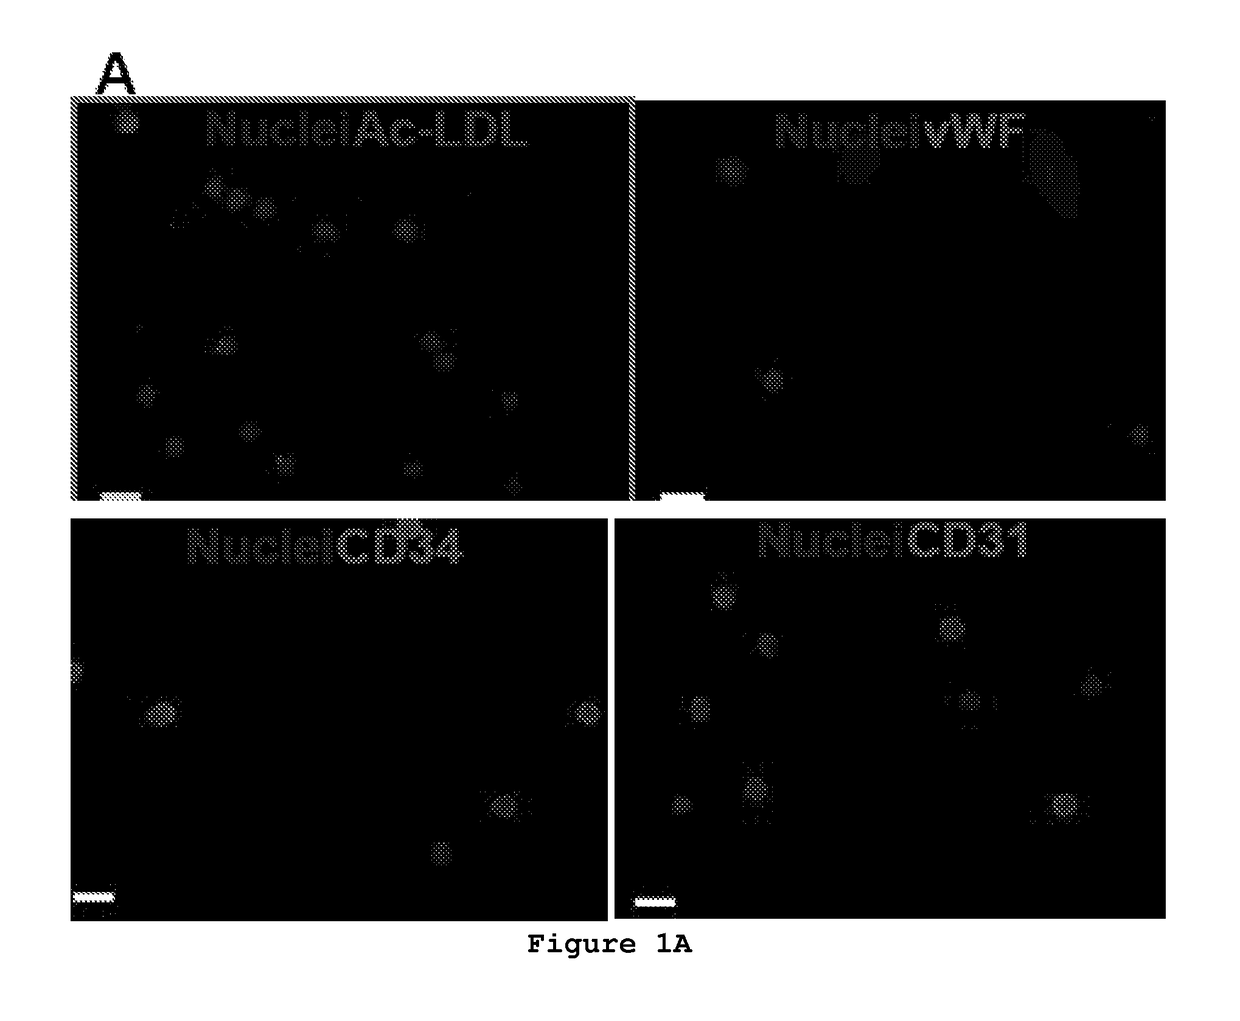 Composition and method to improve the therapeutic effect of stem cells